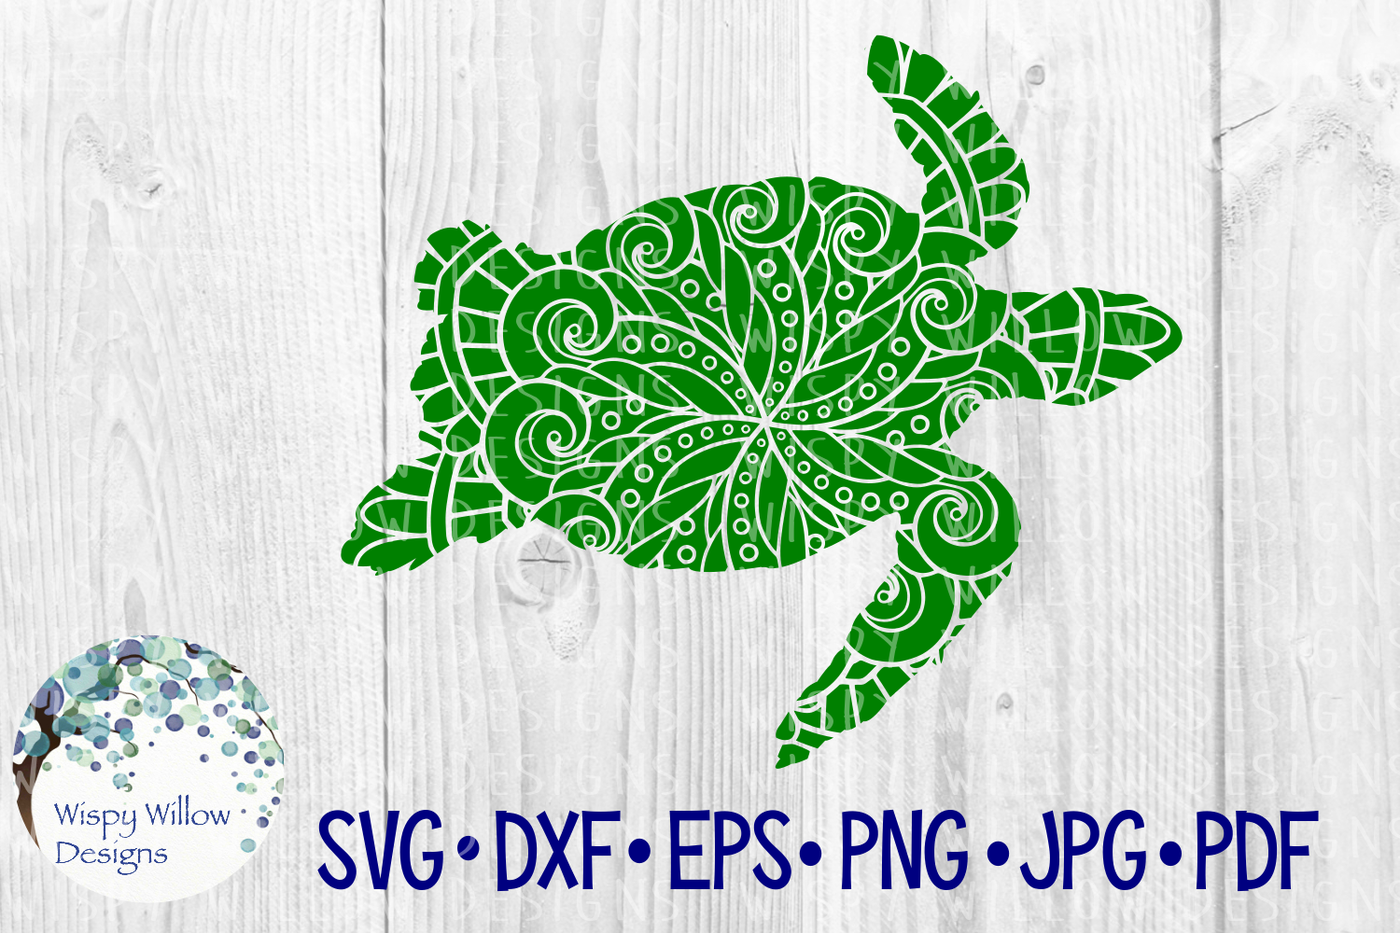 Sea Turtle Zentangle Summer Animal Svg Dxf Eps Png Jpg Pdf By Wispy Willow Designs Thehungryjpeg Com